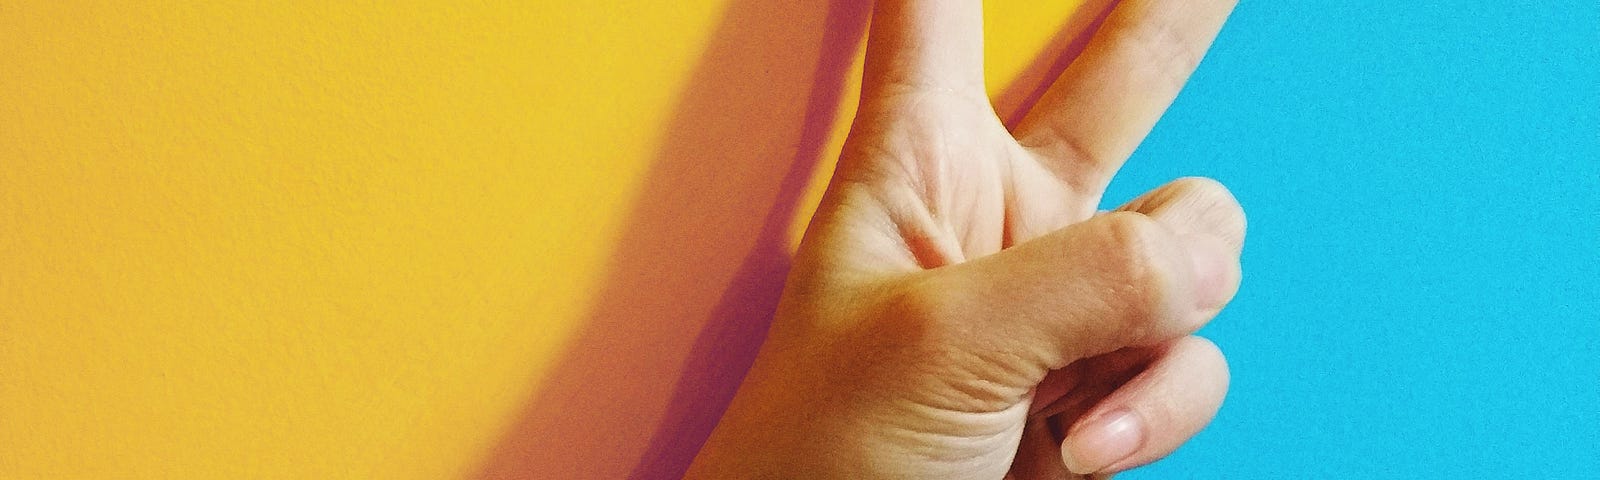 two fingers raised against a blue and yellow background